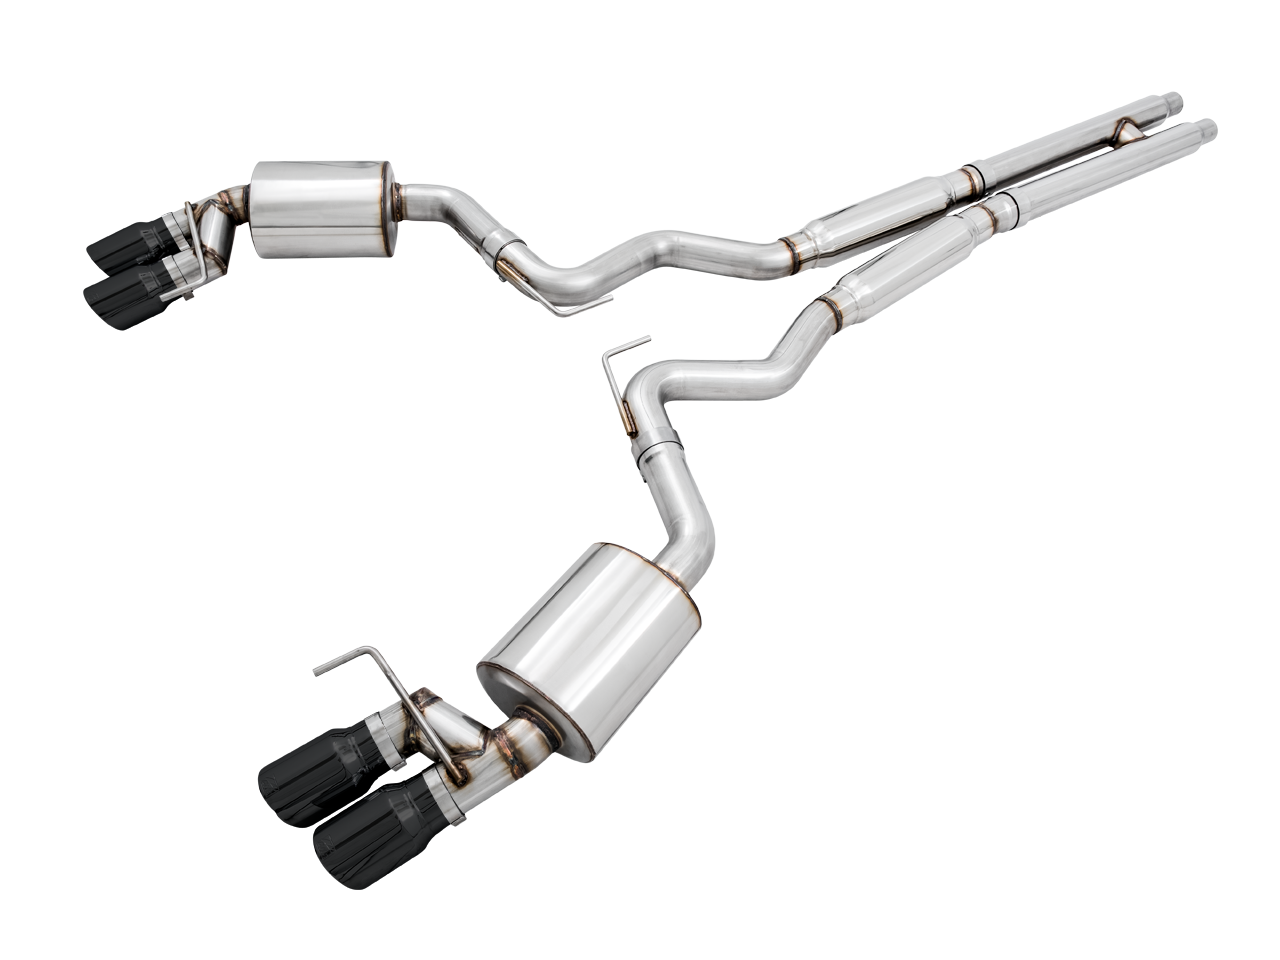 AWE EXHAUST SUITE FOR THE 2018+ FORD S550 MUSTANG GT